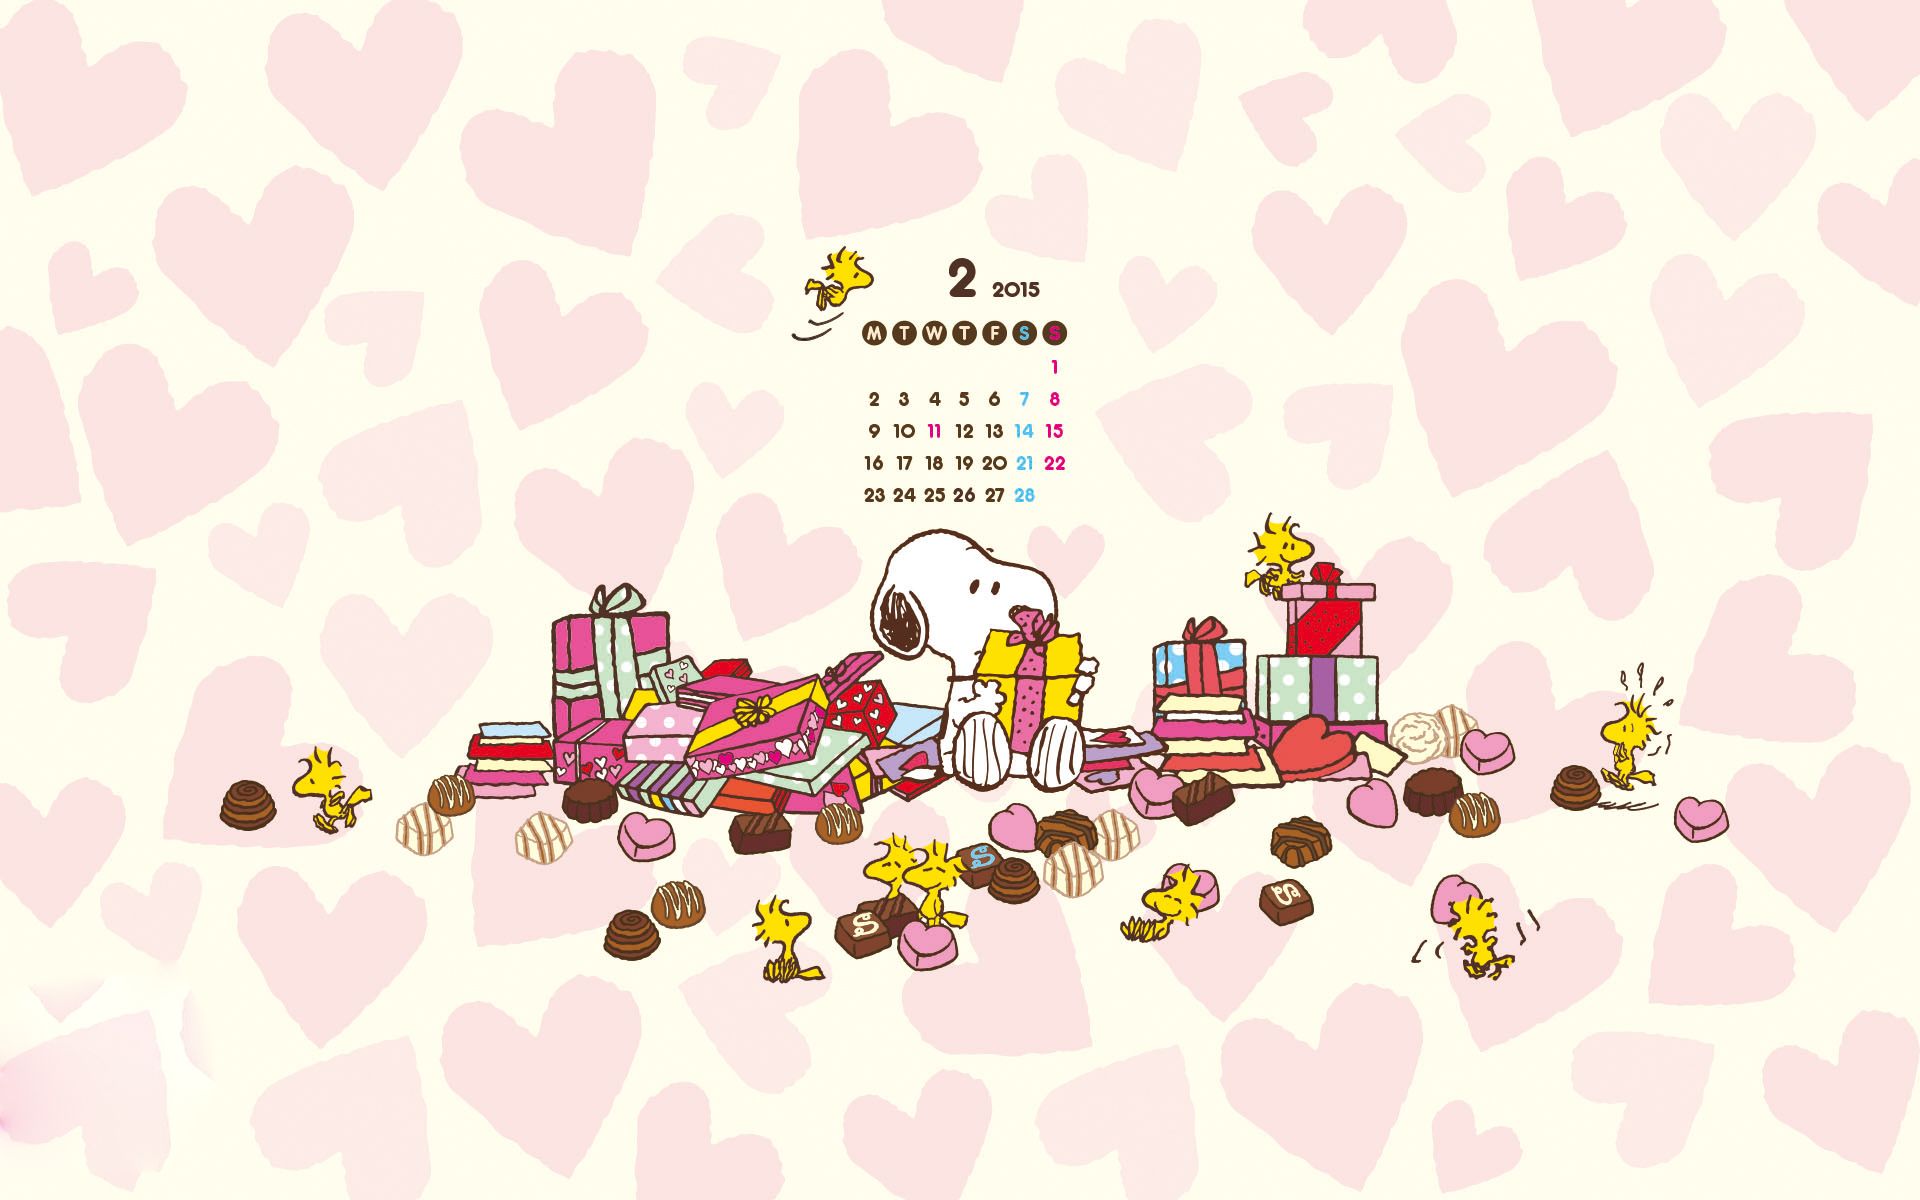 Peanut Snoopy 2015 Wallpapers Hd - Snoopy Valentine Wallpapers Free